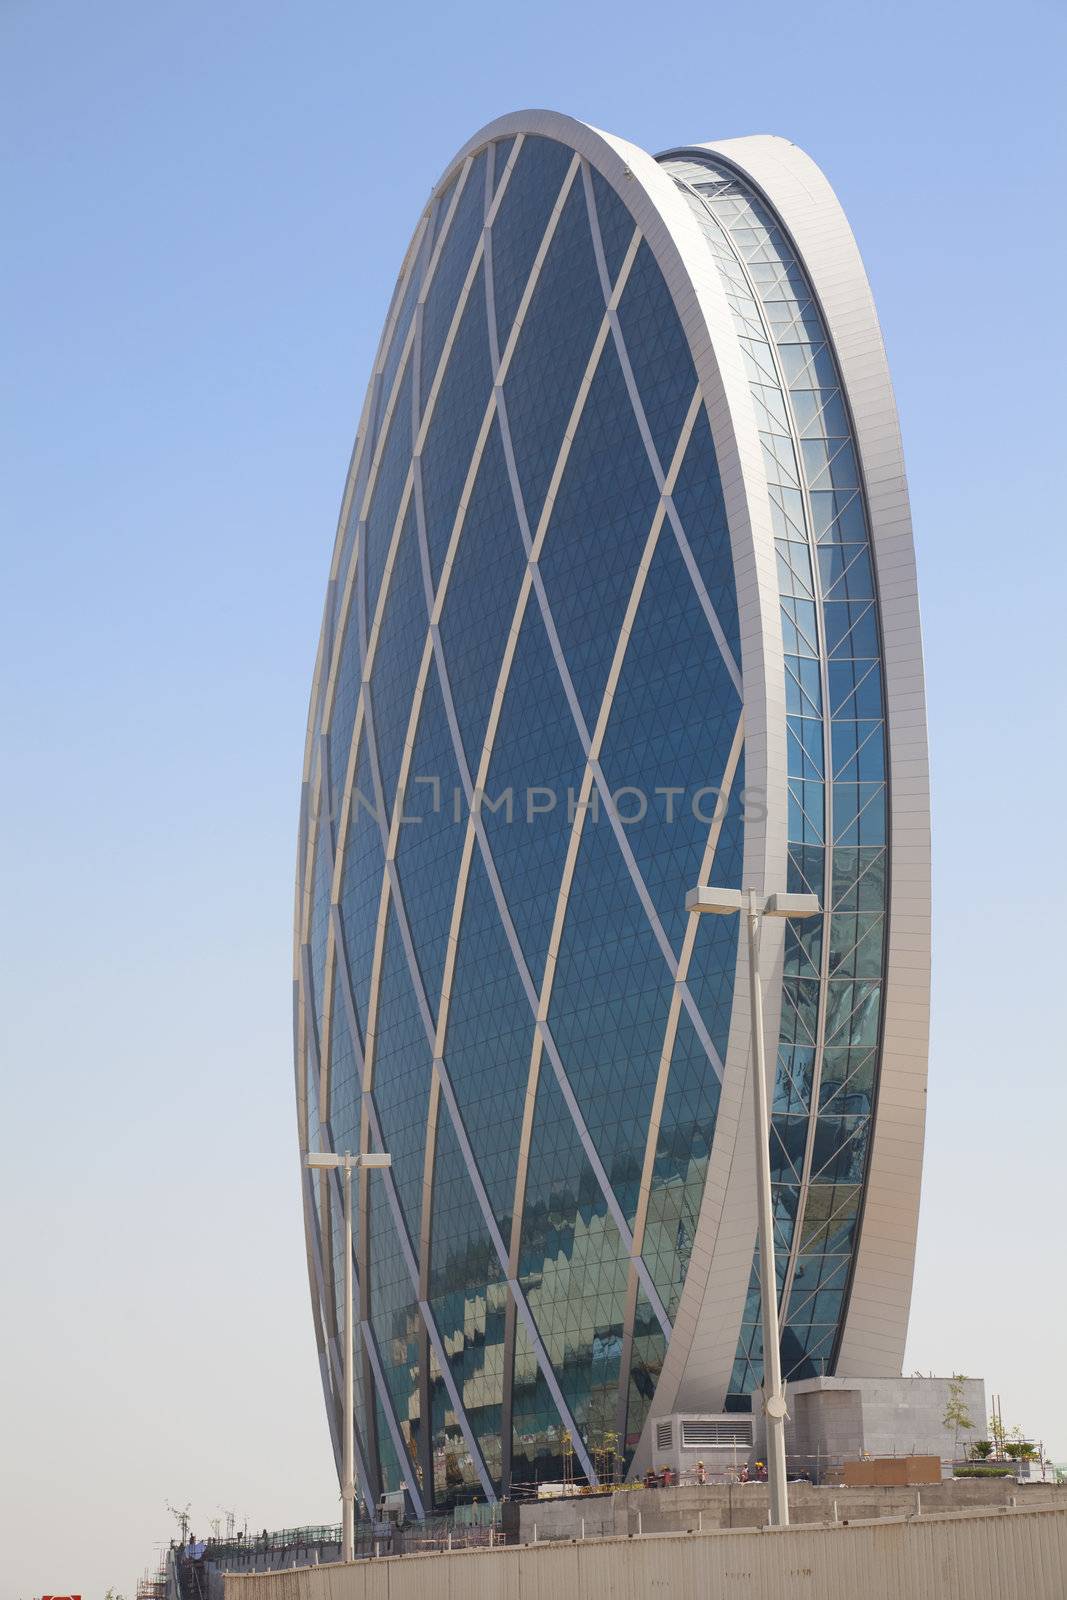 Image of a unique saucer shaped building at Abu Dhabi, United Arab Emirates.
